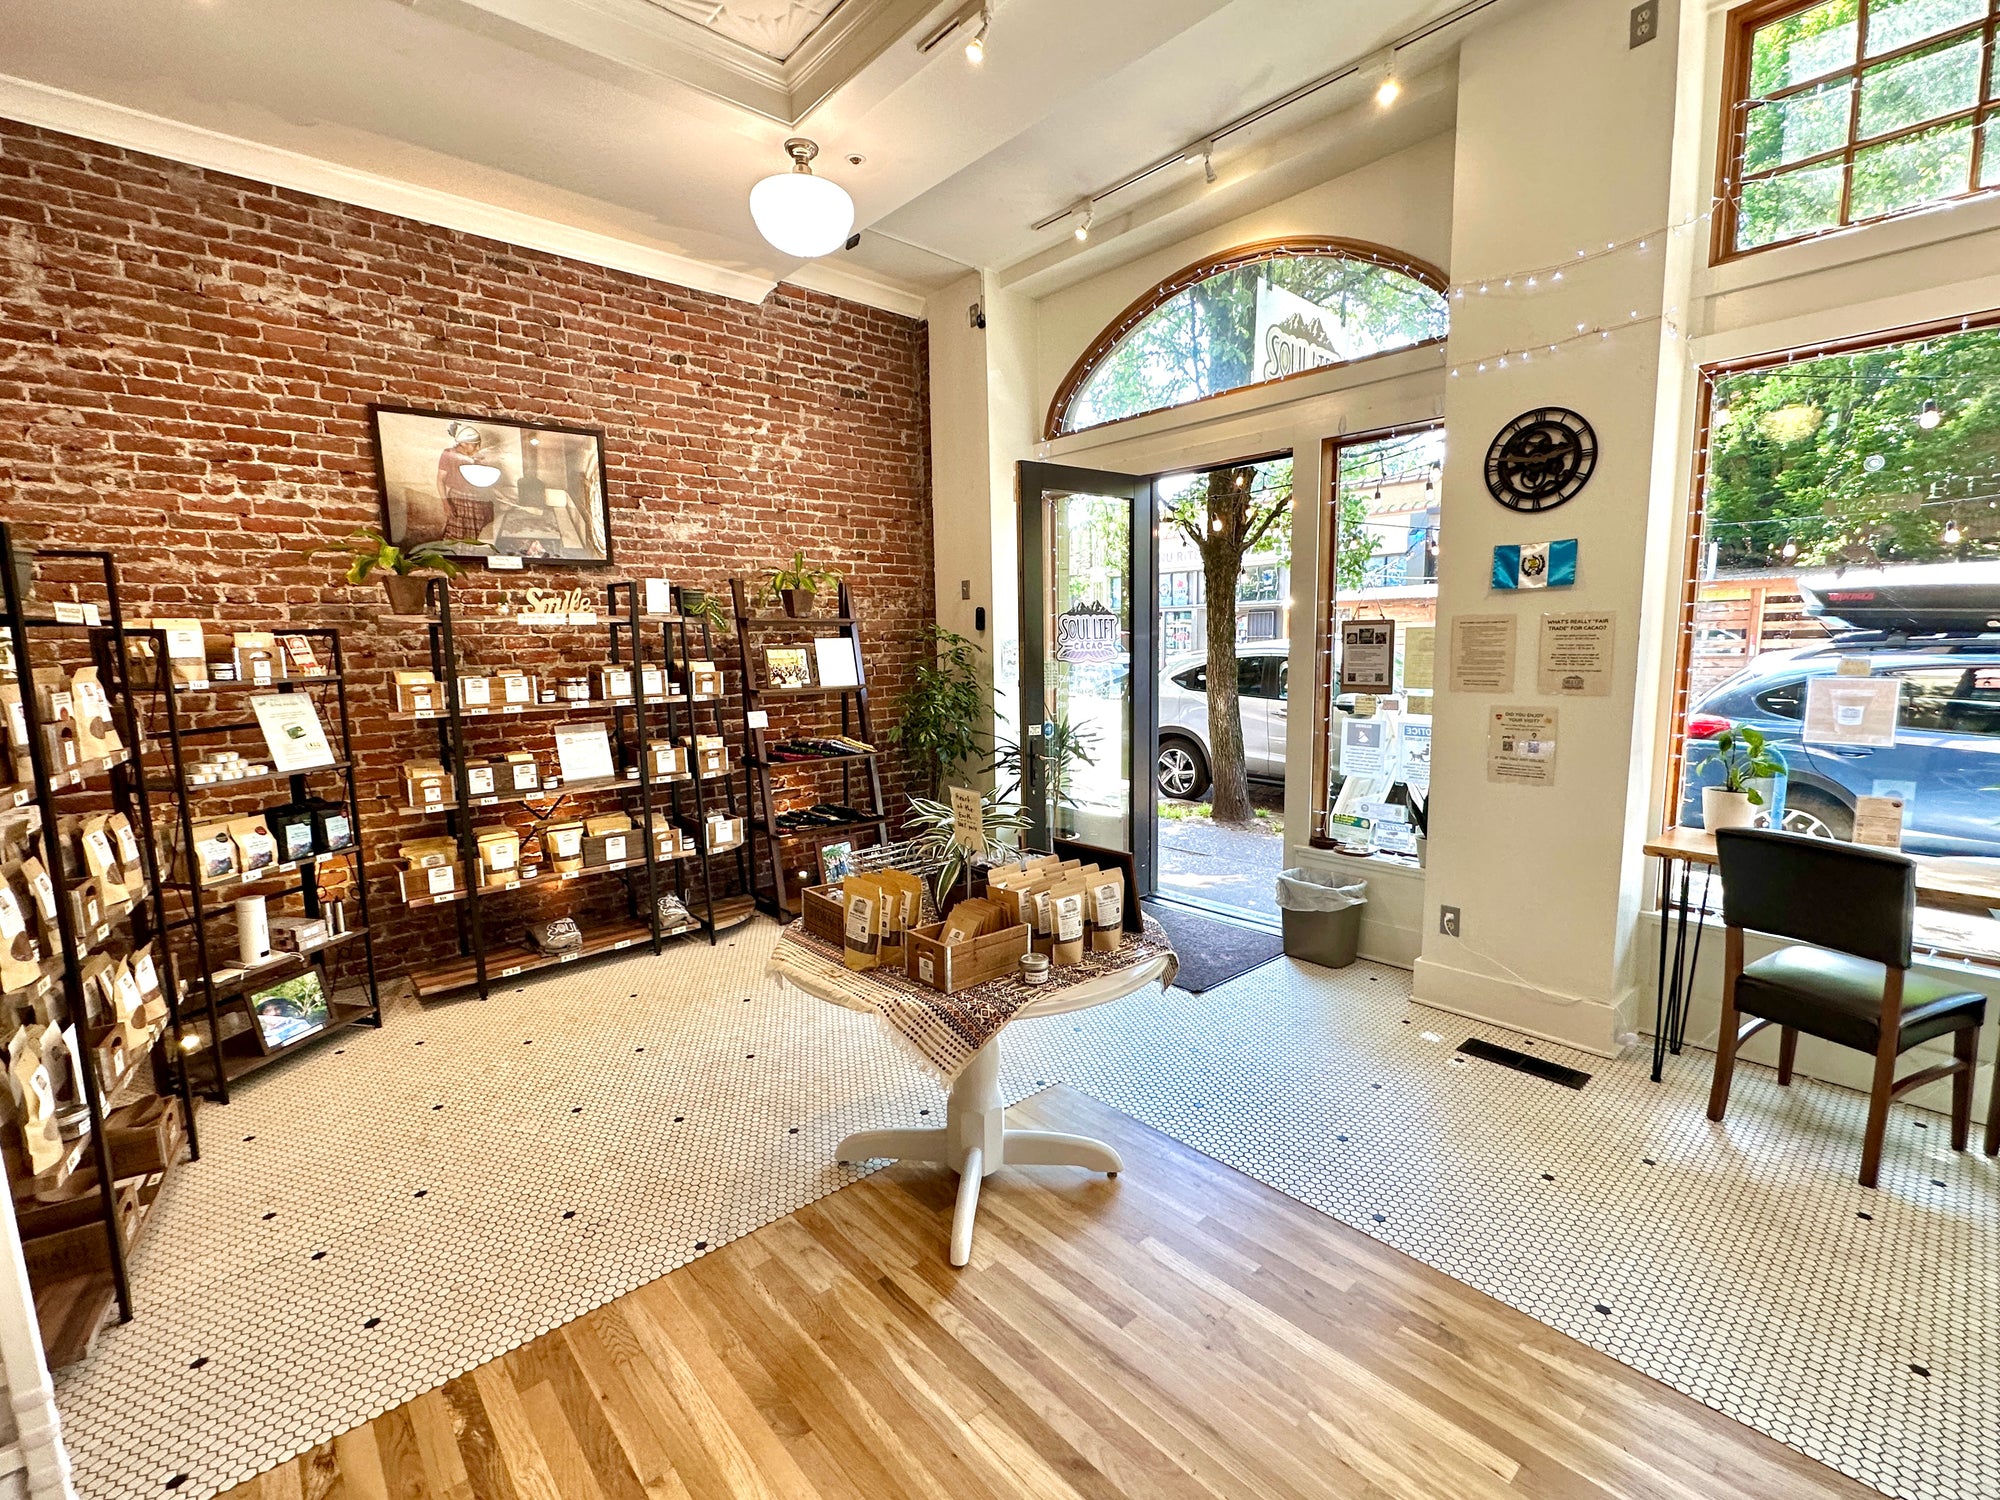 Why We Closed Our Brick-and-Mortar Cacao Shop